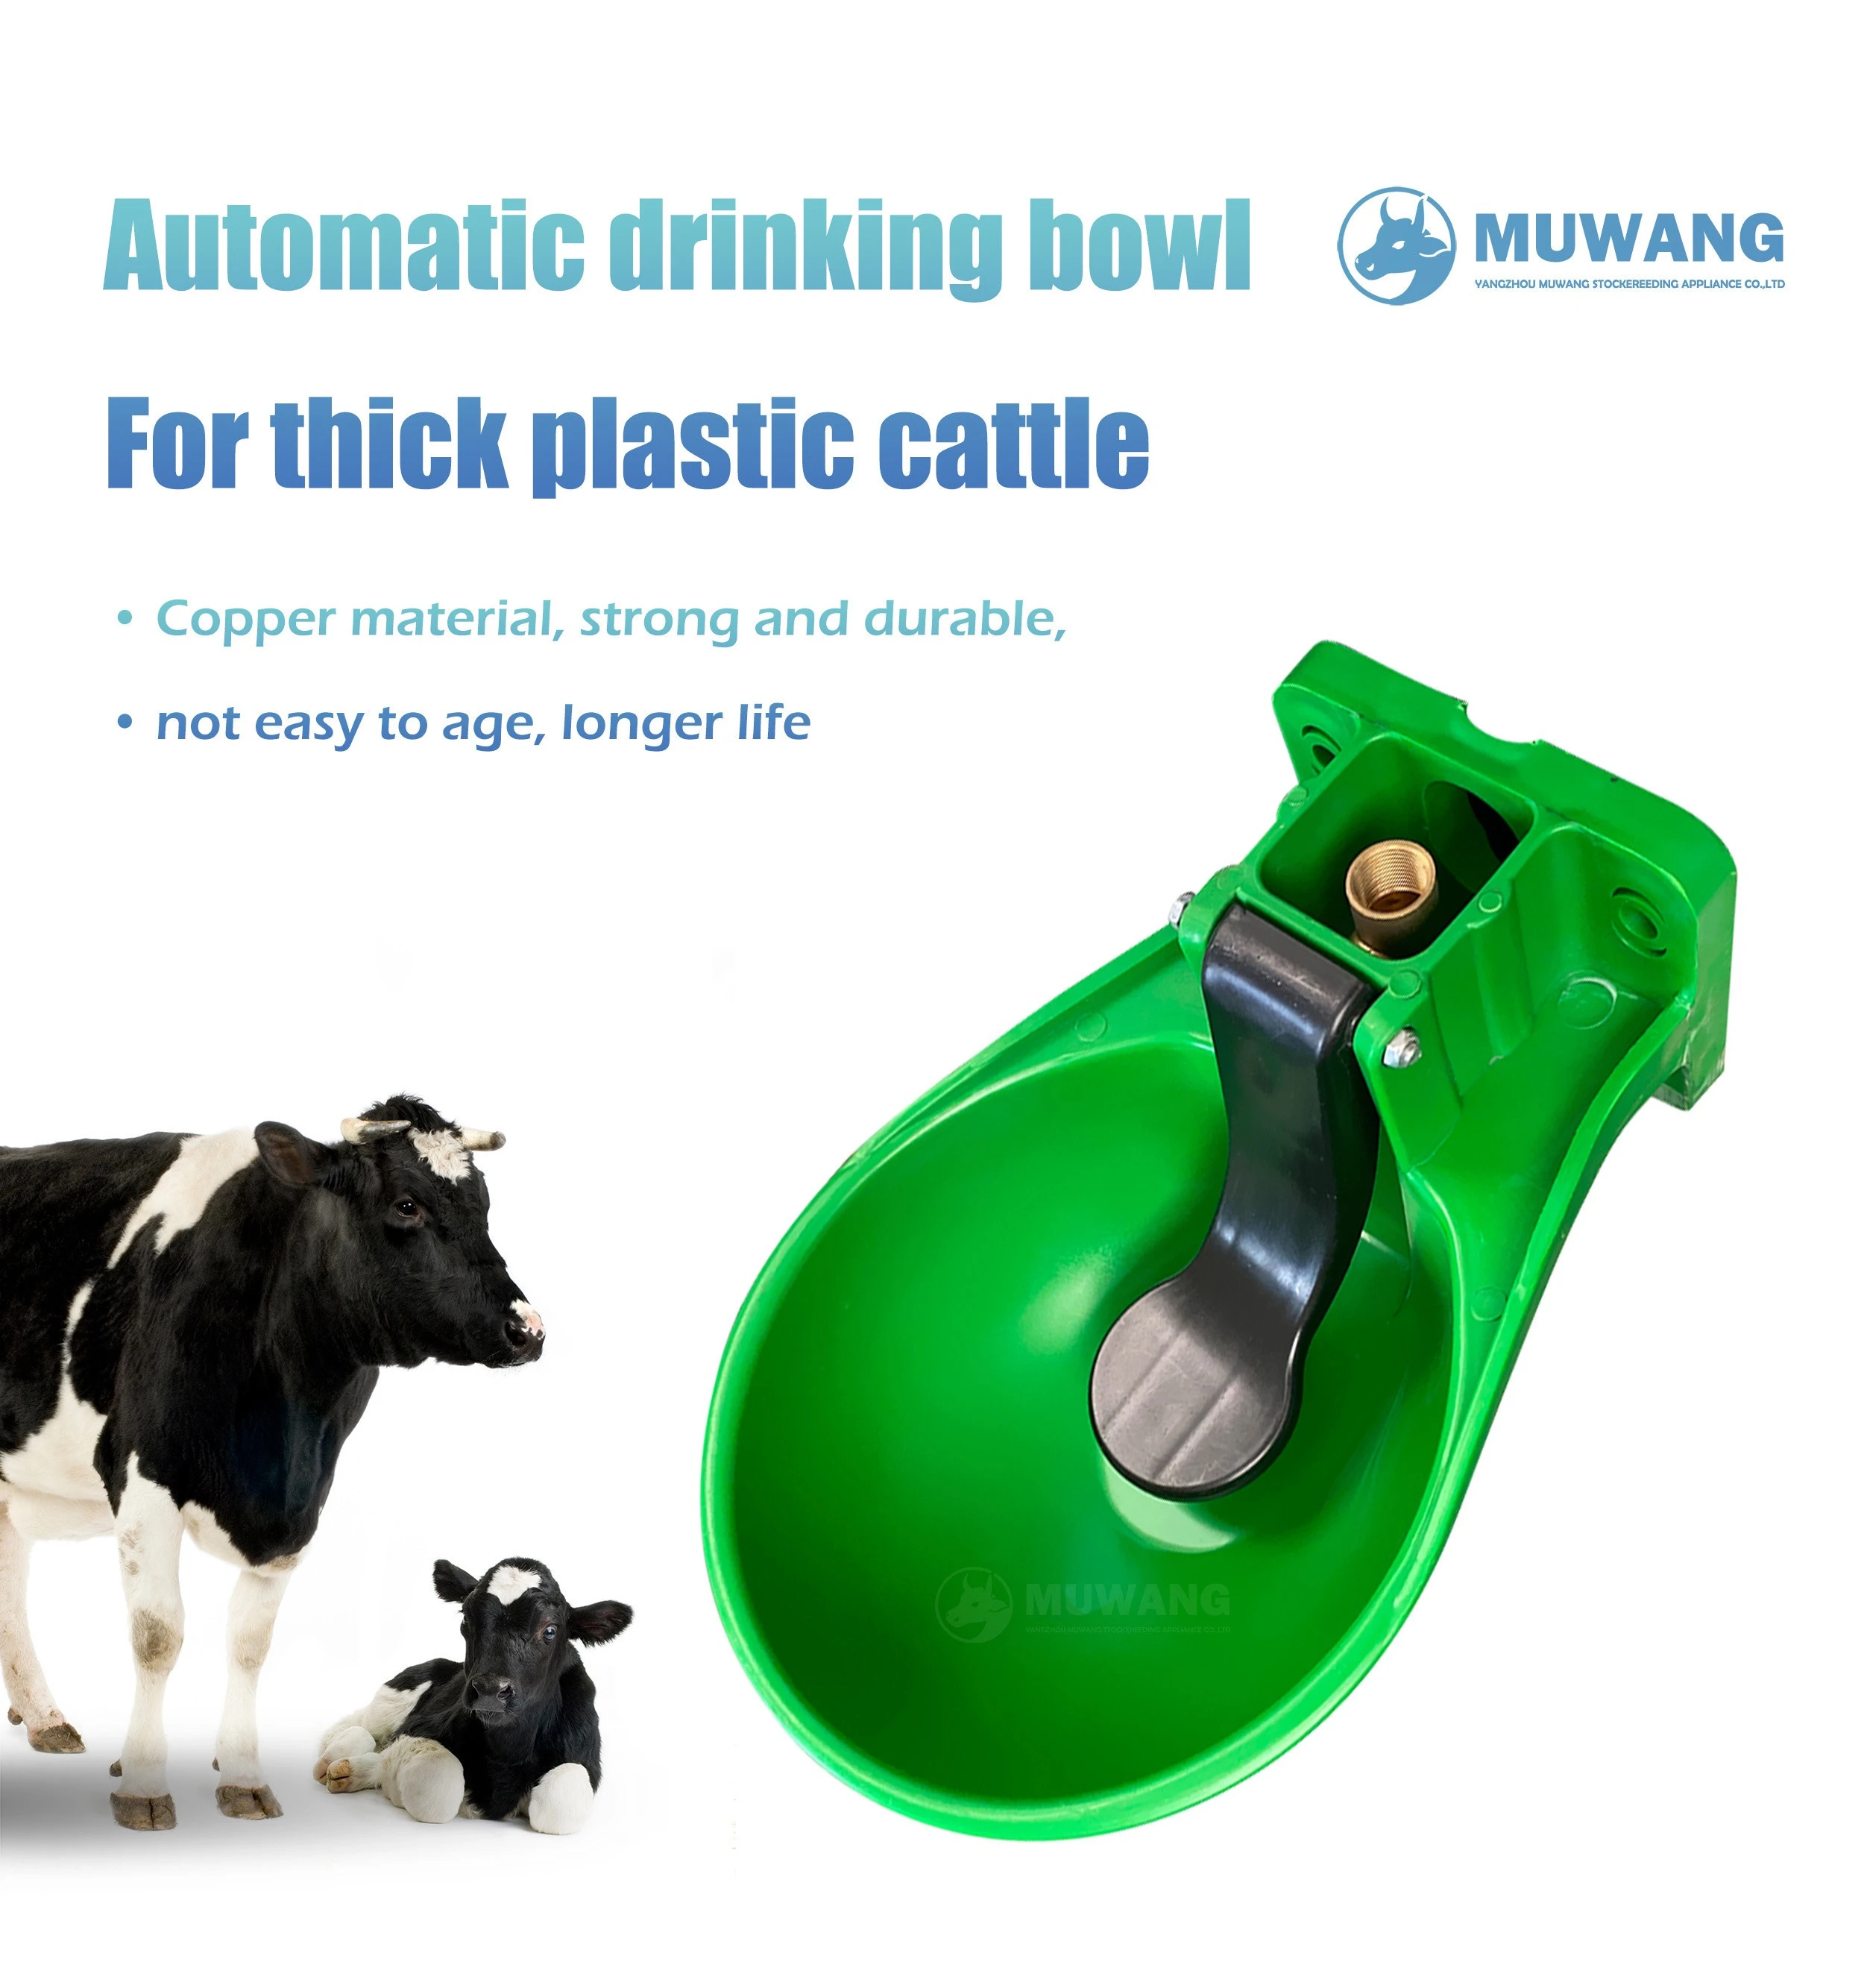 Factory Outlet Cattle Drinking Bowl Water Automatic Cattle Drinker Cow Water Trough for Livestock Farm